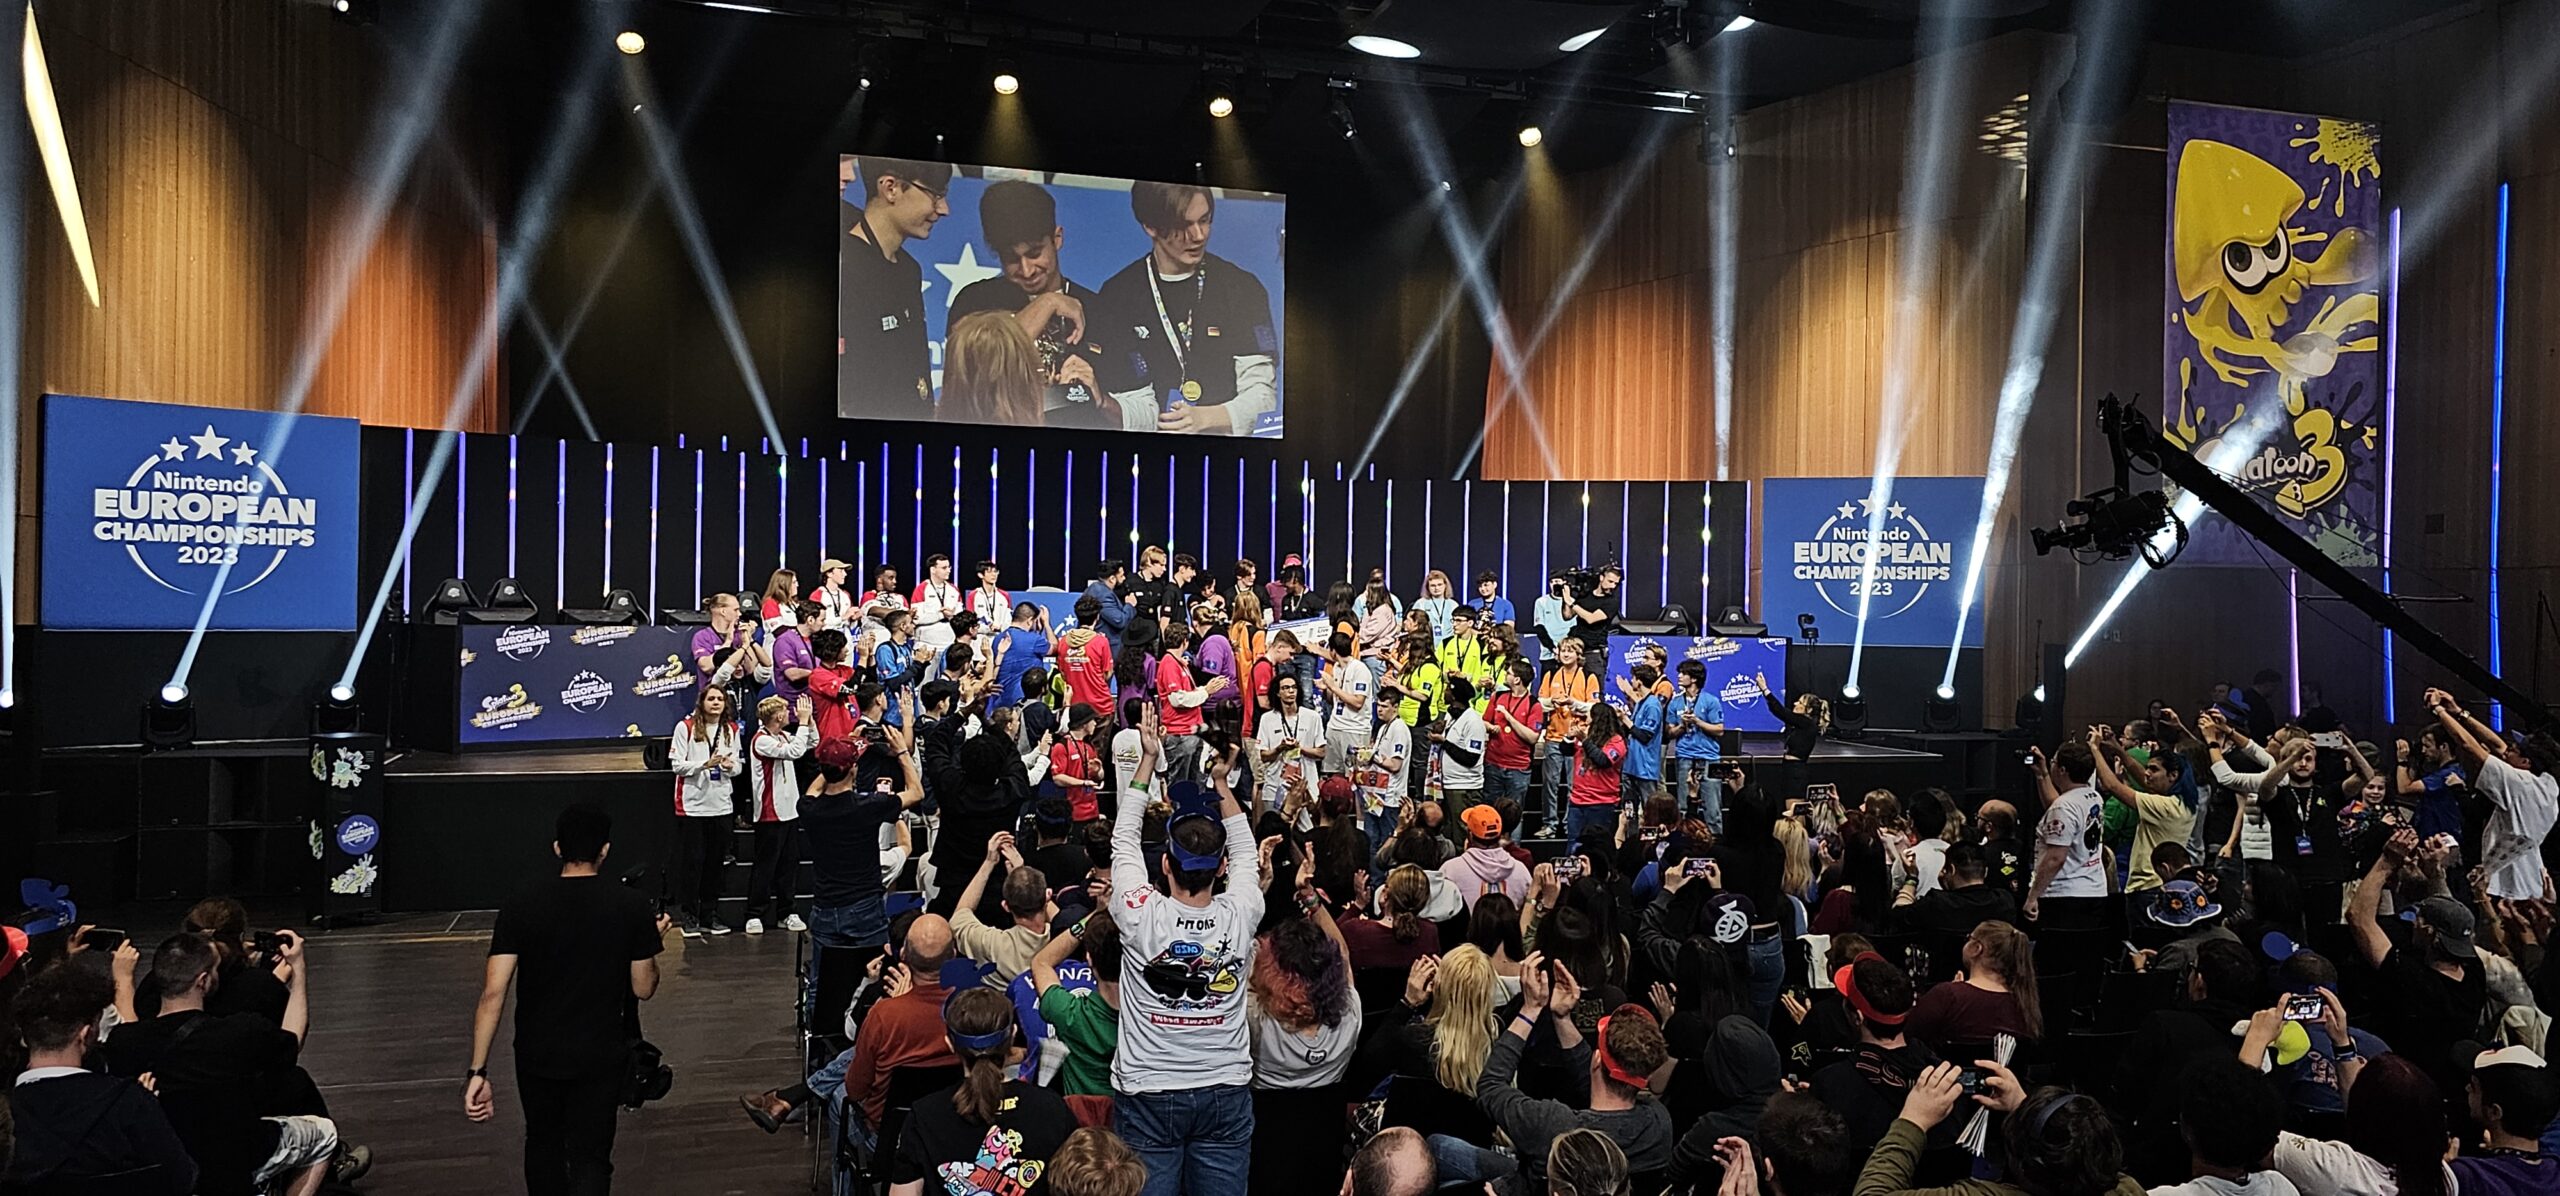 All splatoon players on stage during the ceremony